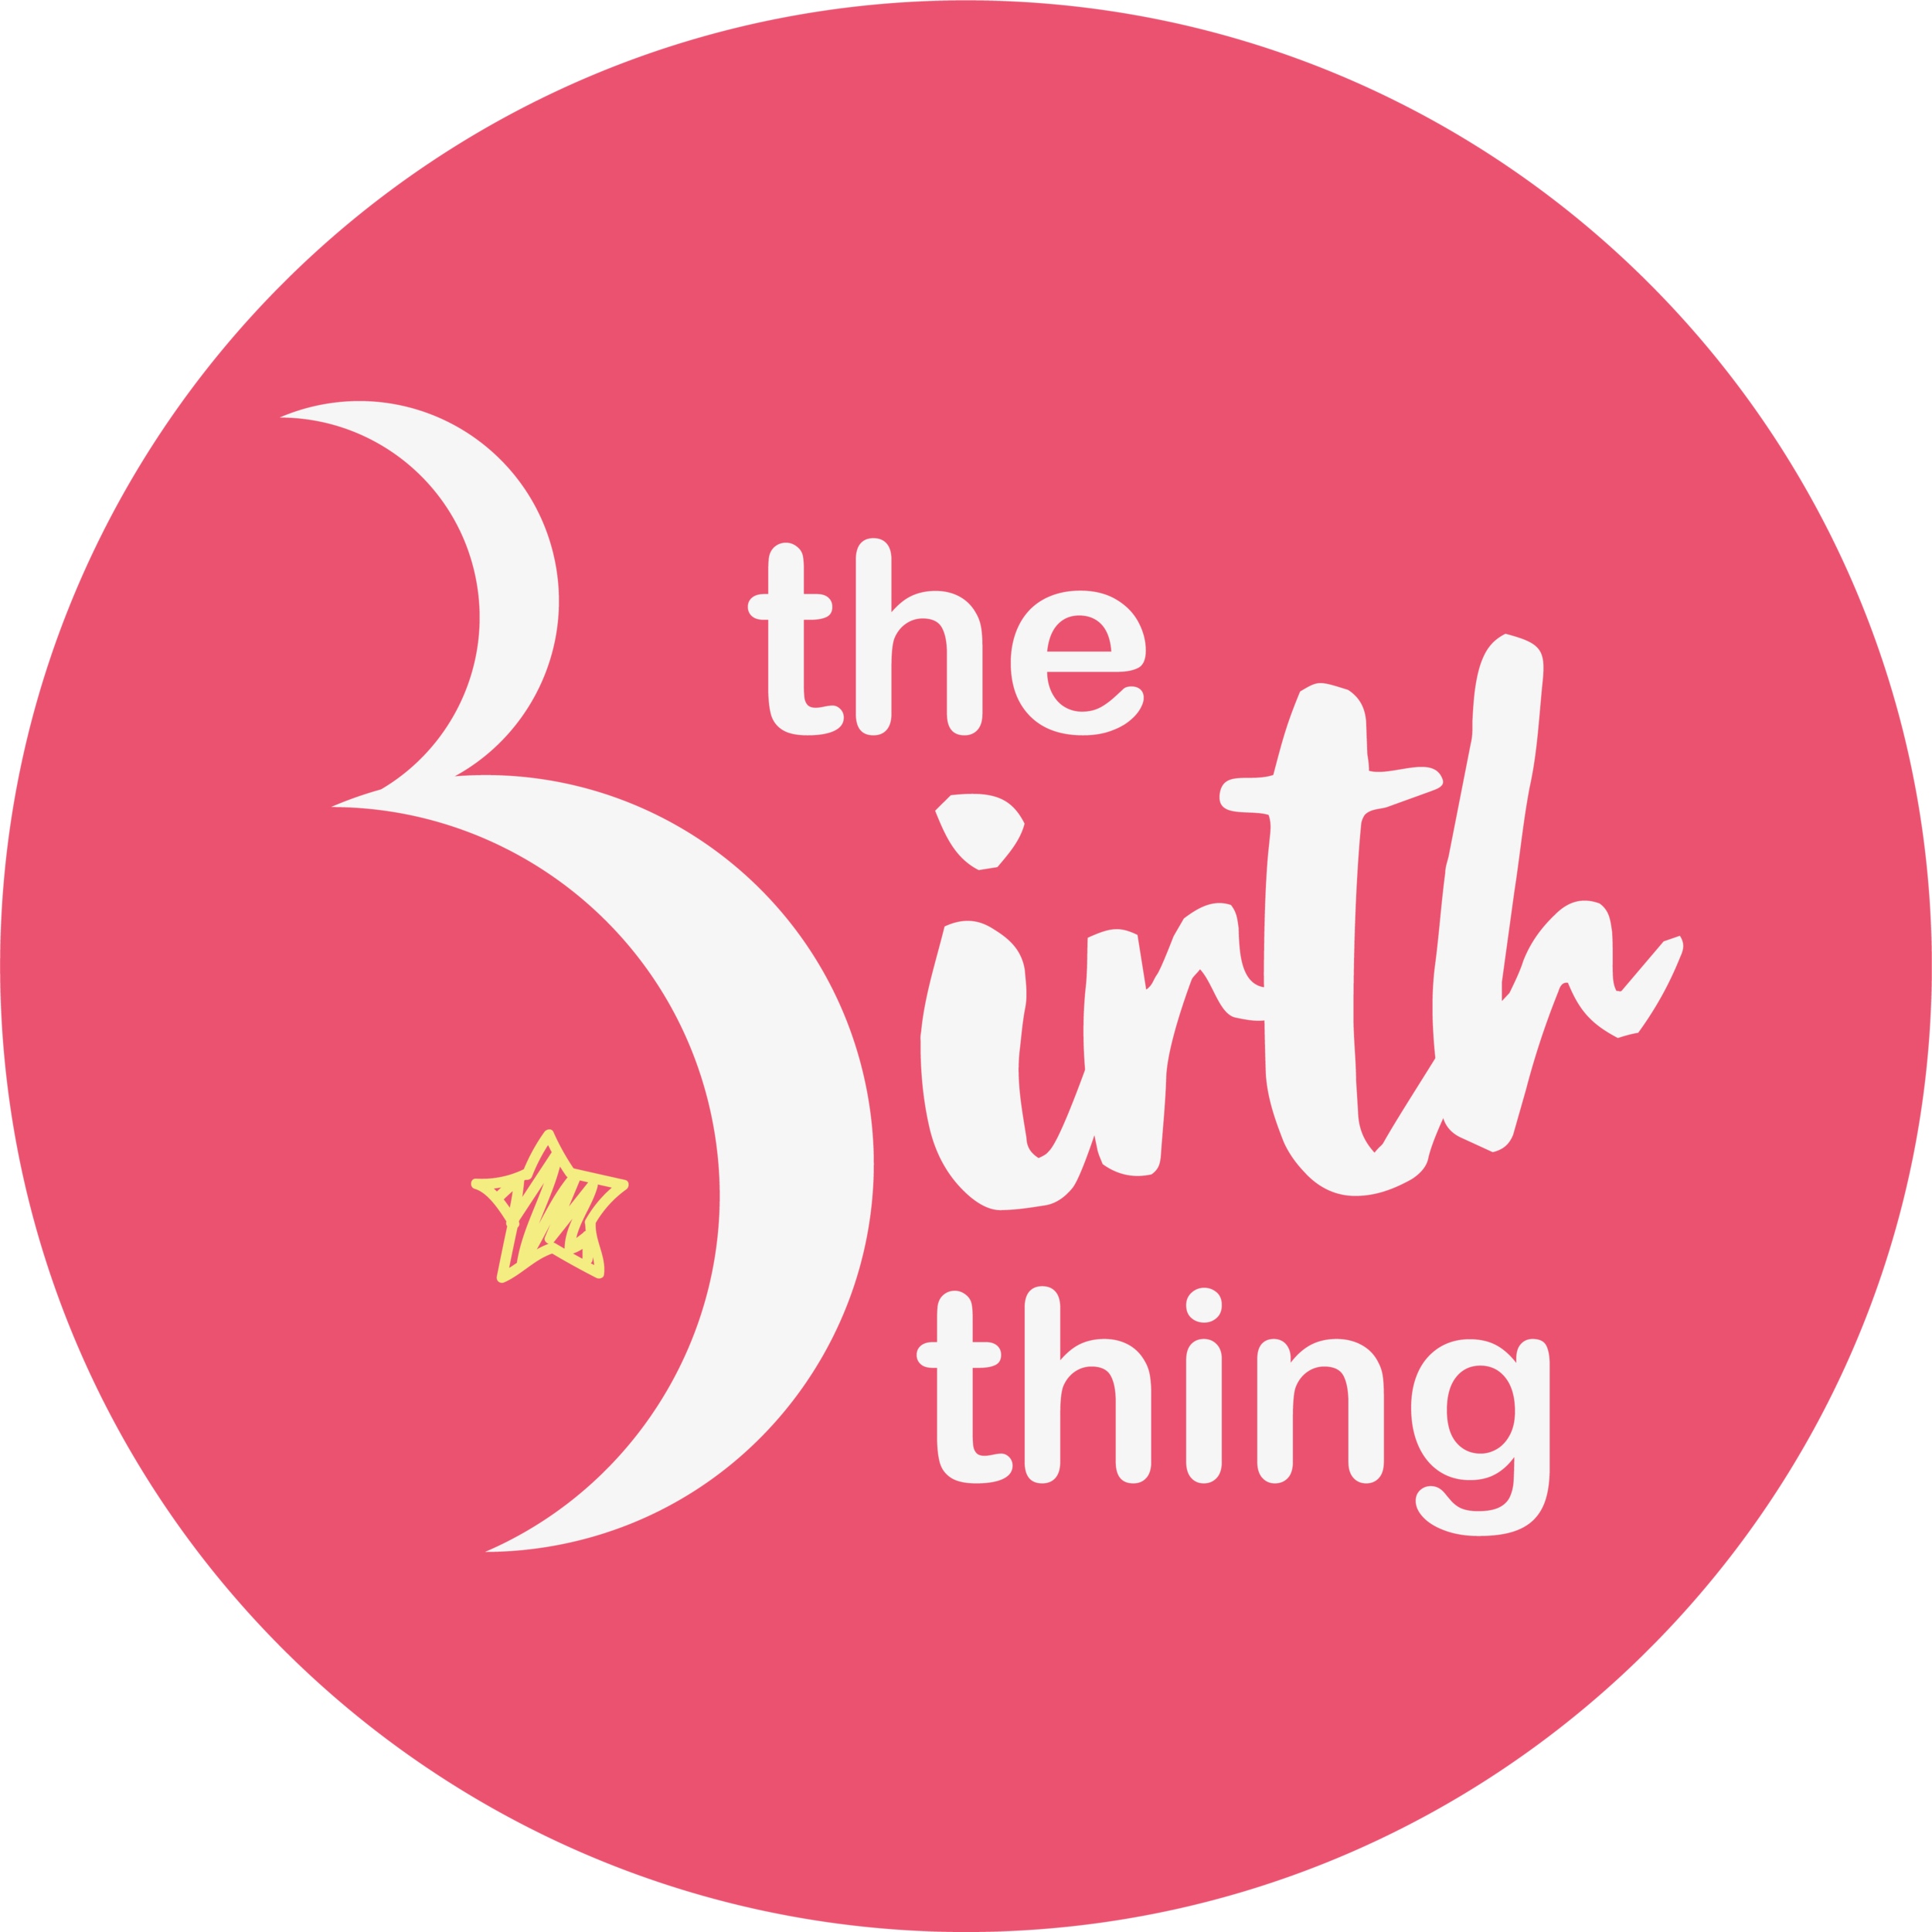 THE BIRTH THING